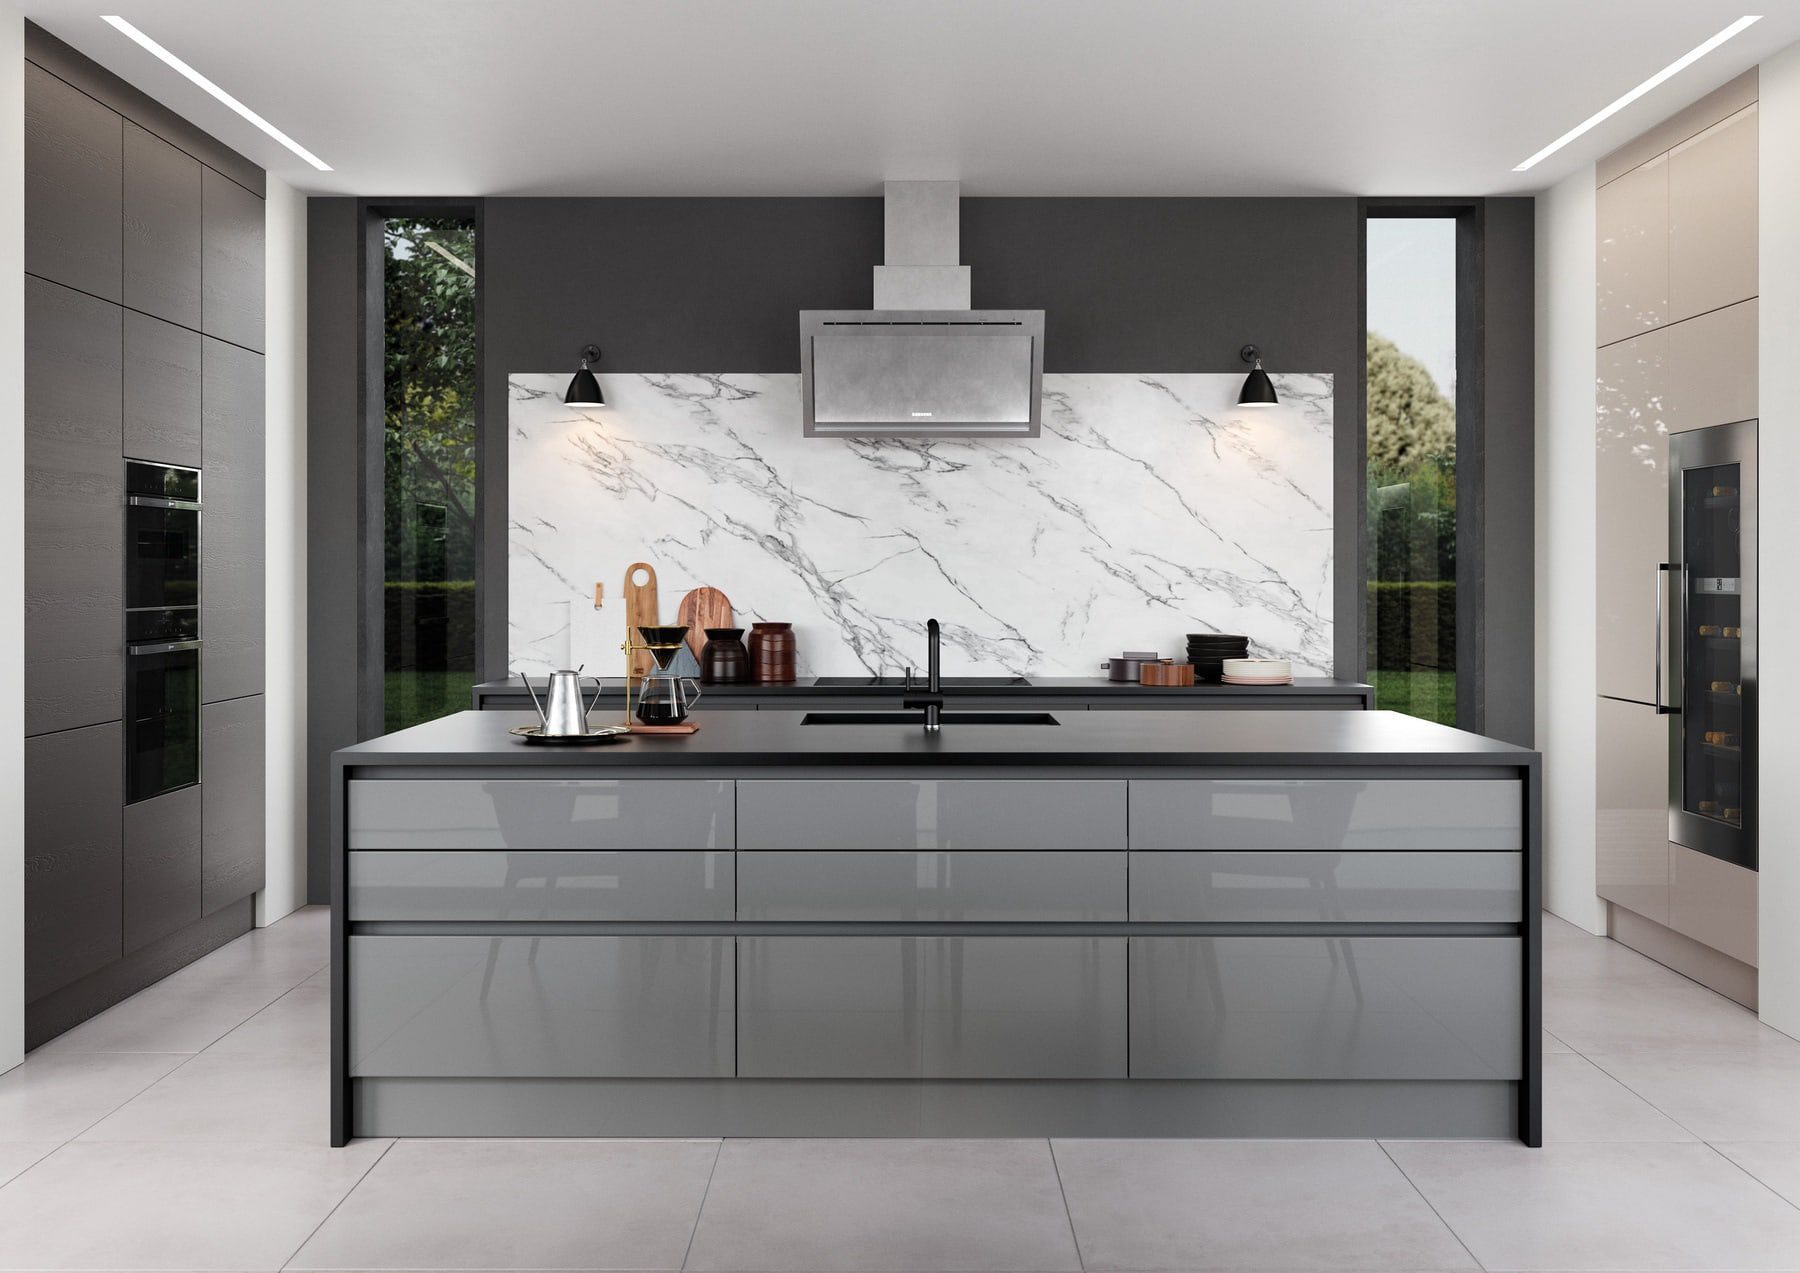 Zola Gloss Dust Grey And Tavola Carbon Kitchen With Island | Colourhill, Boughton